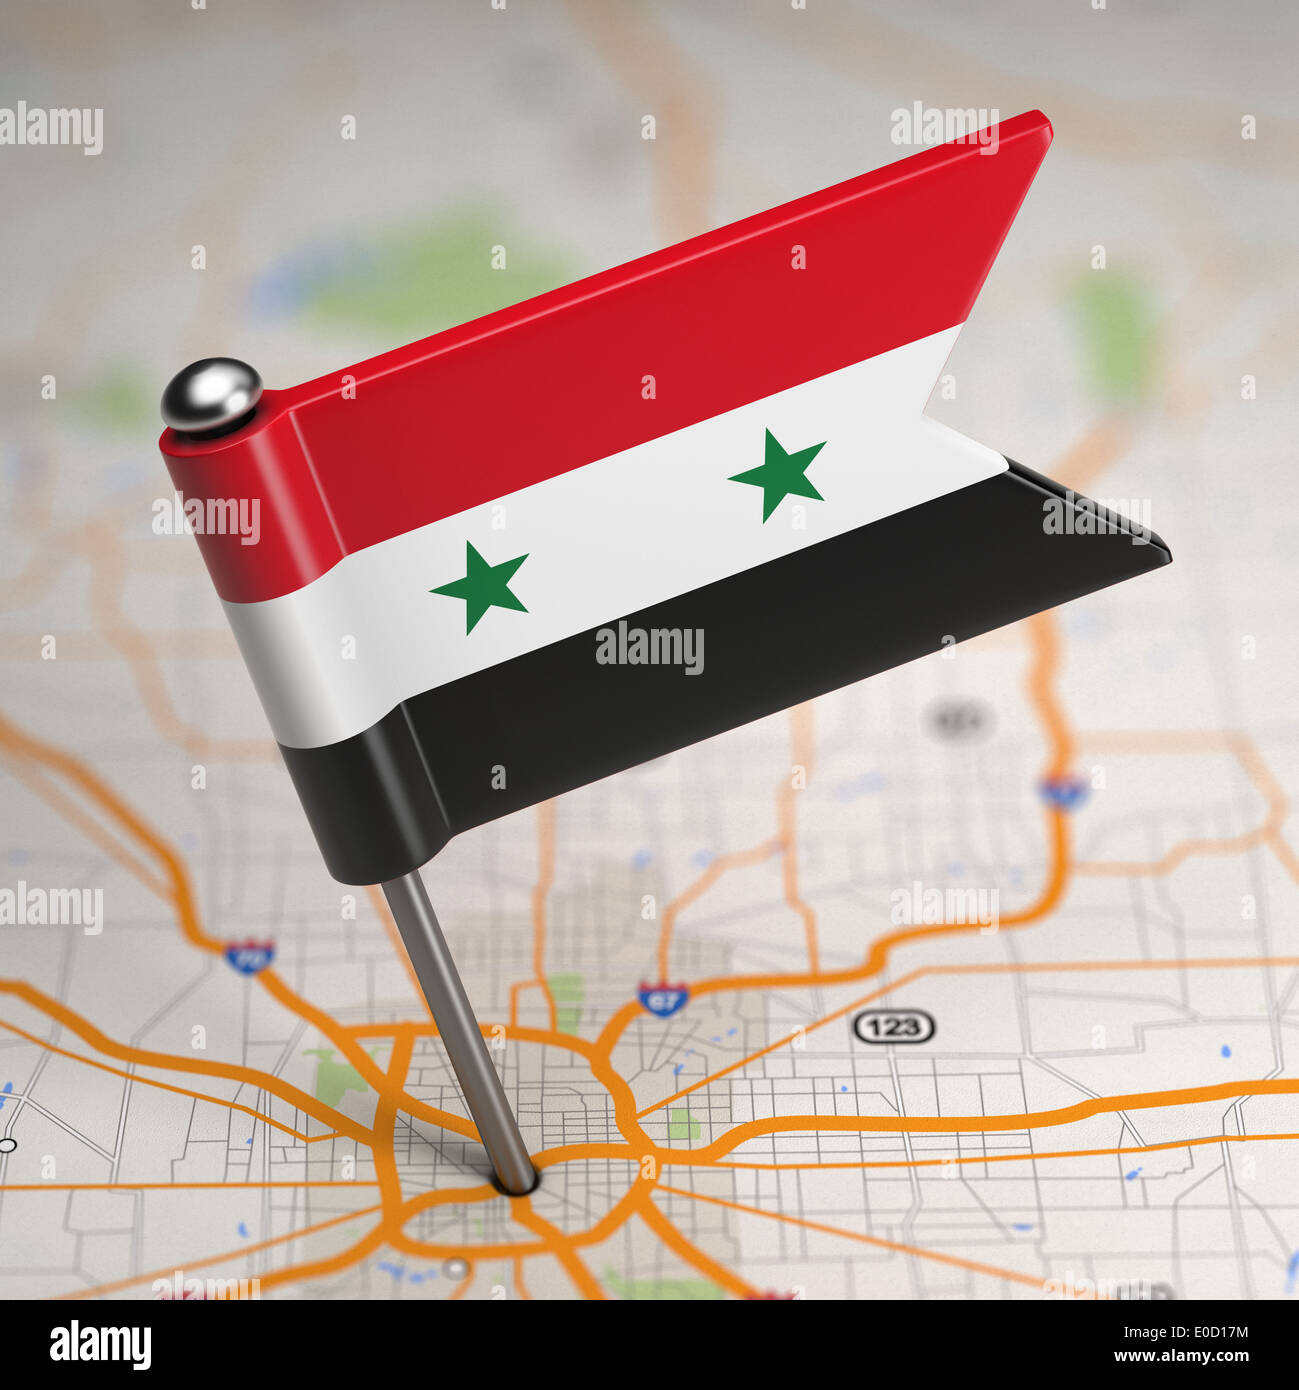 Syria Small Flag on a Map Background. Stock Photo